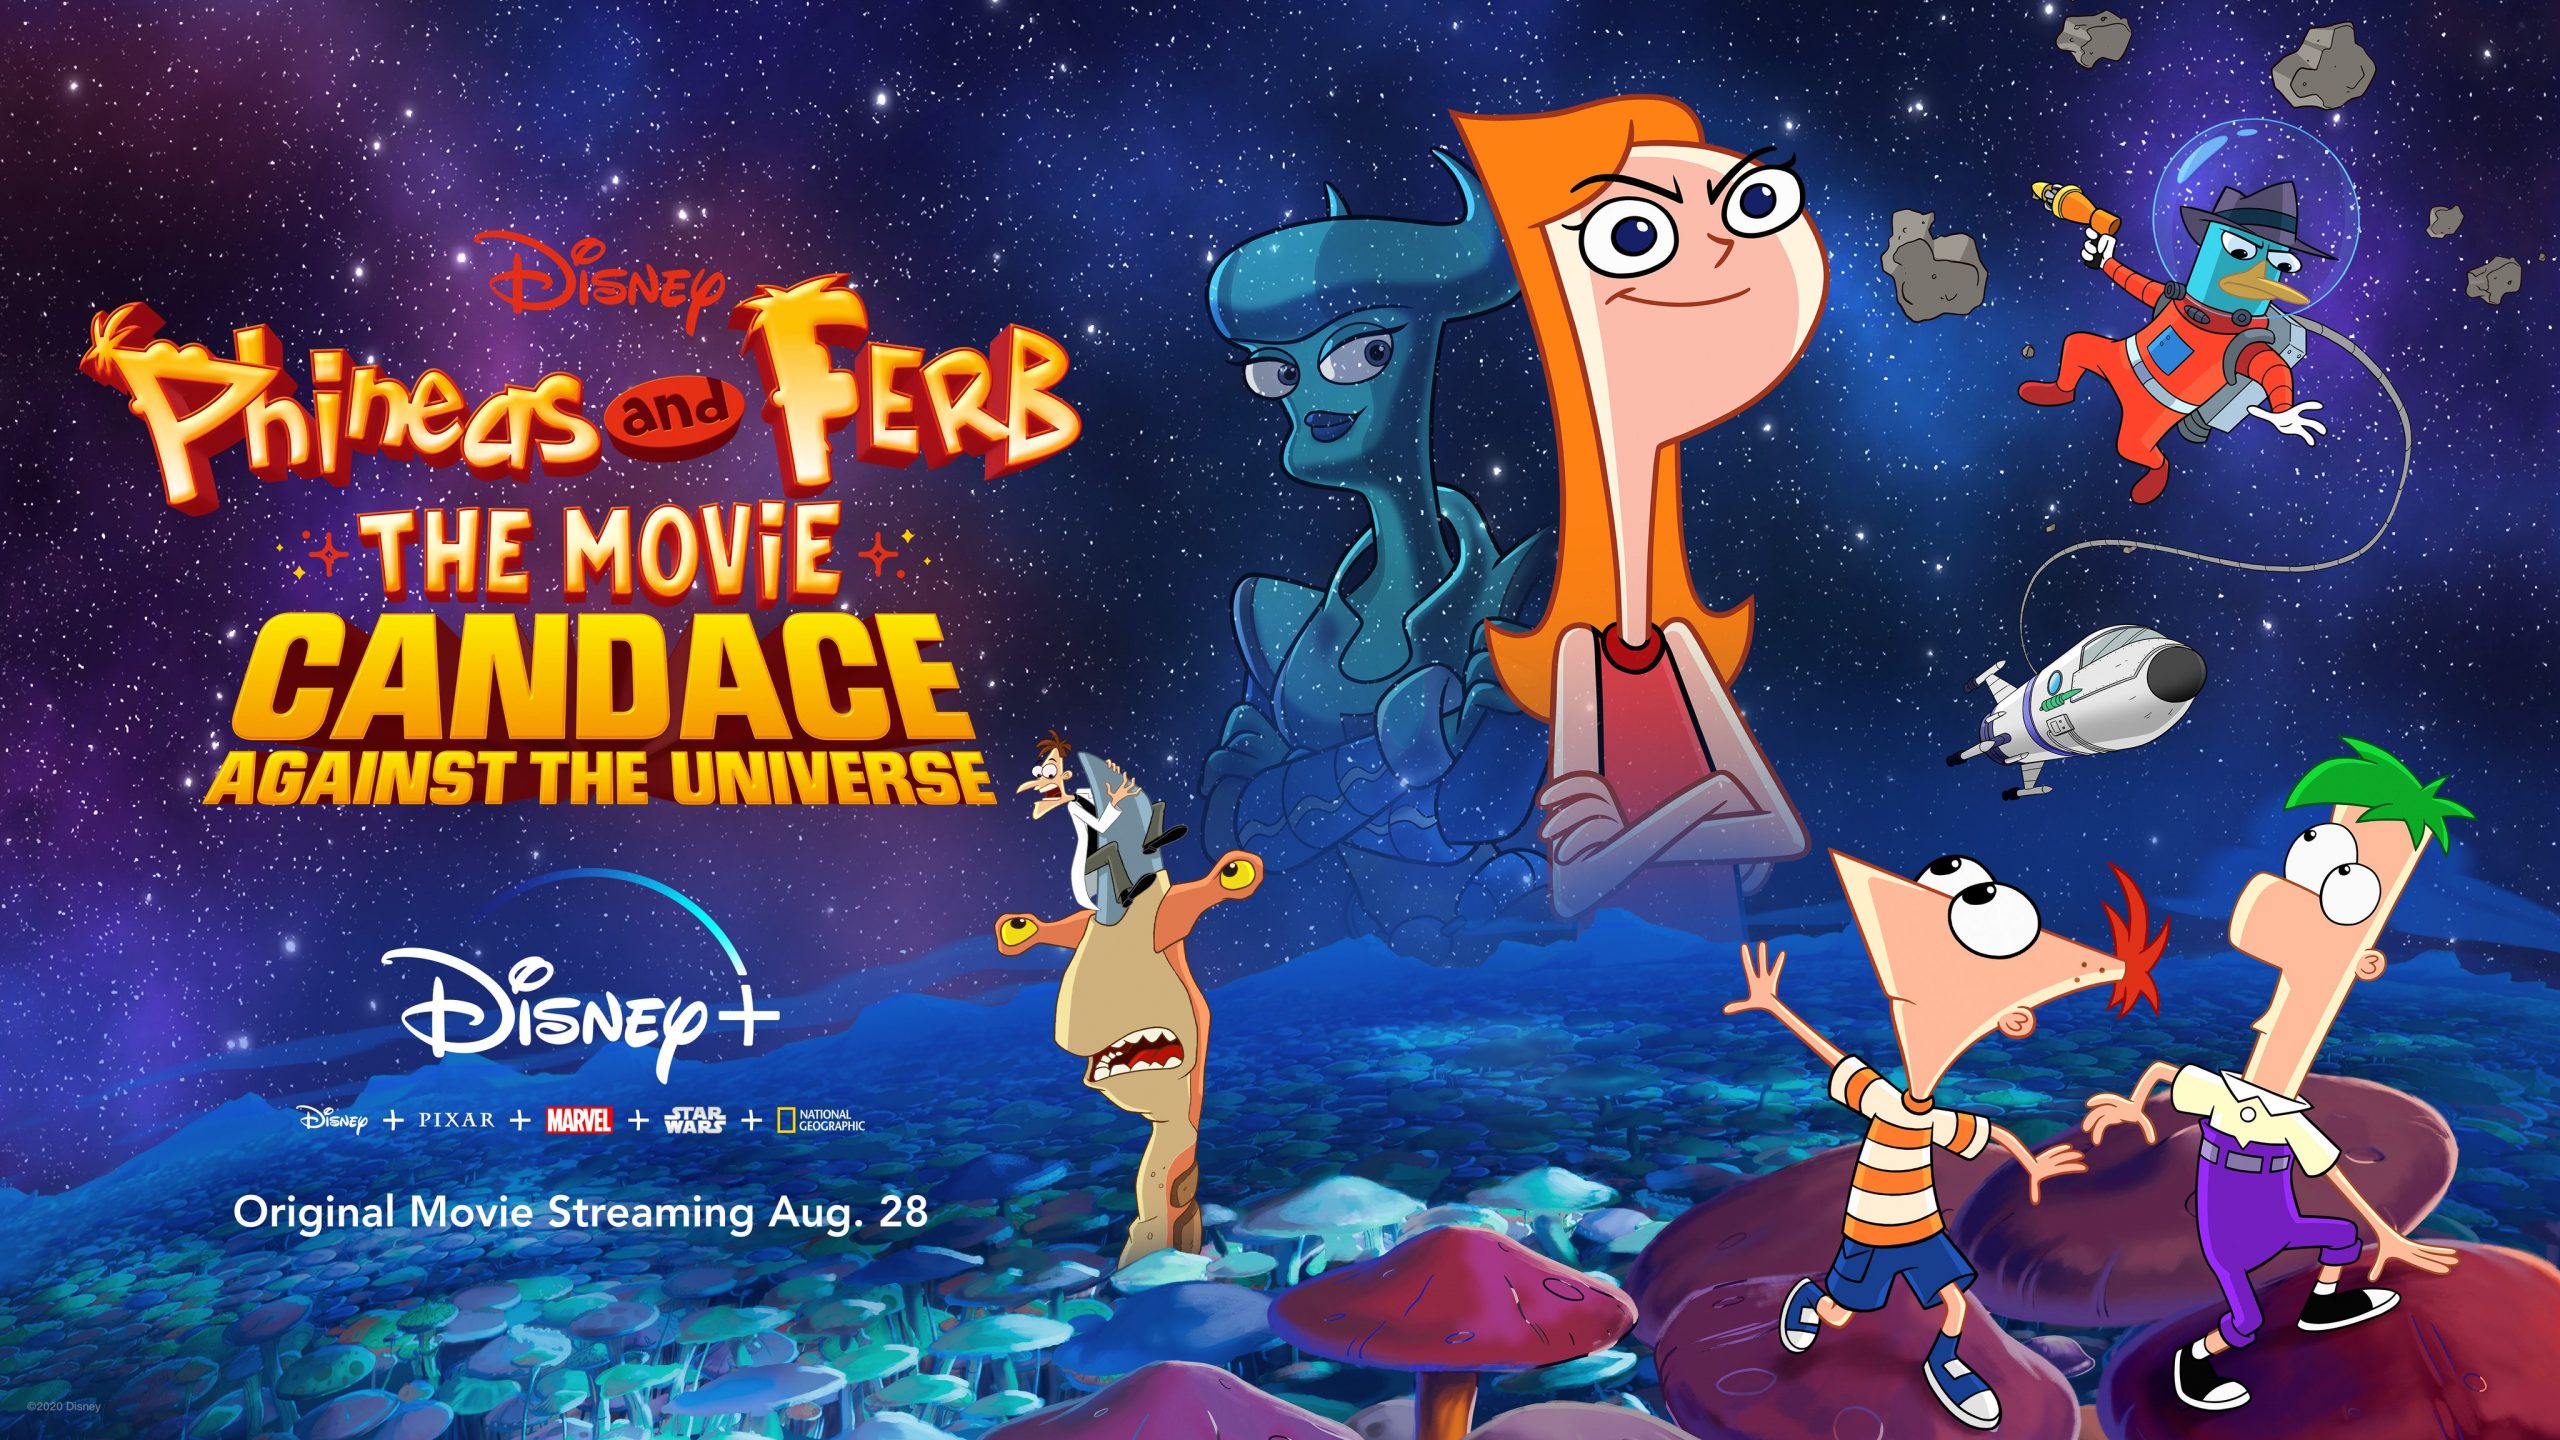 Phineas and Ferb The Movie Candace Against The Universe